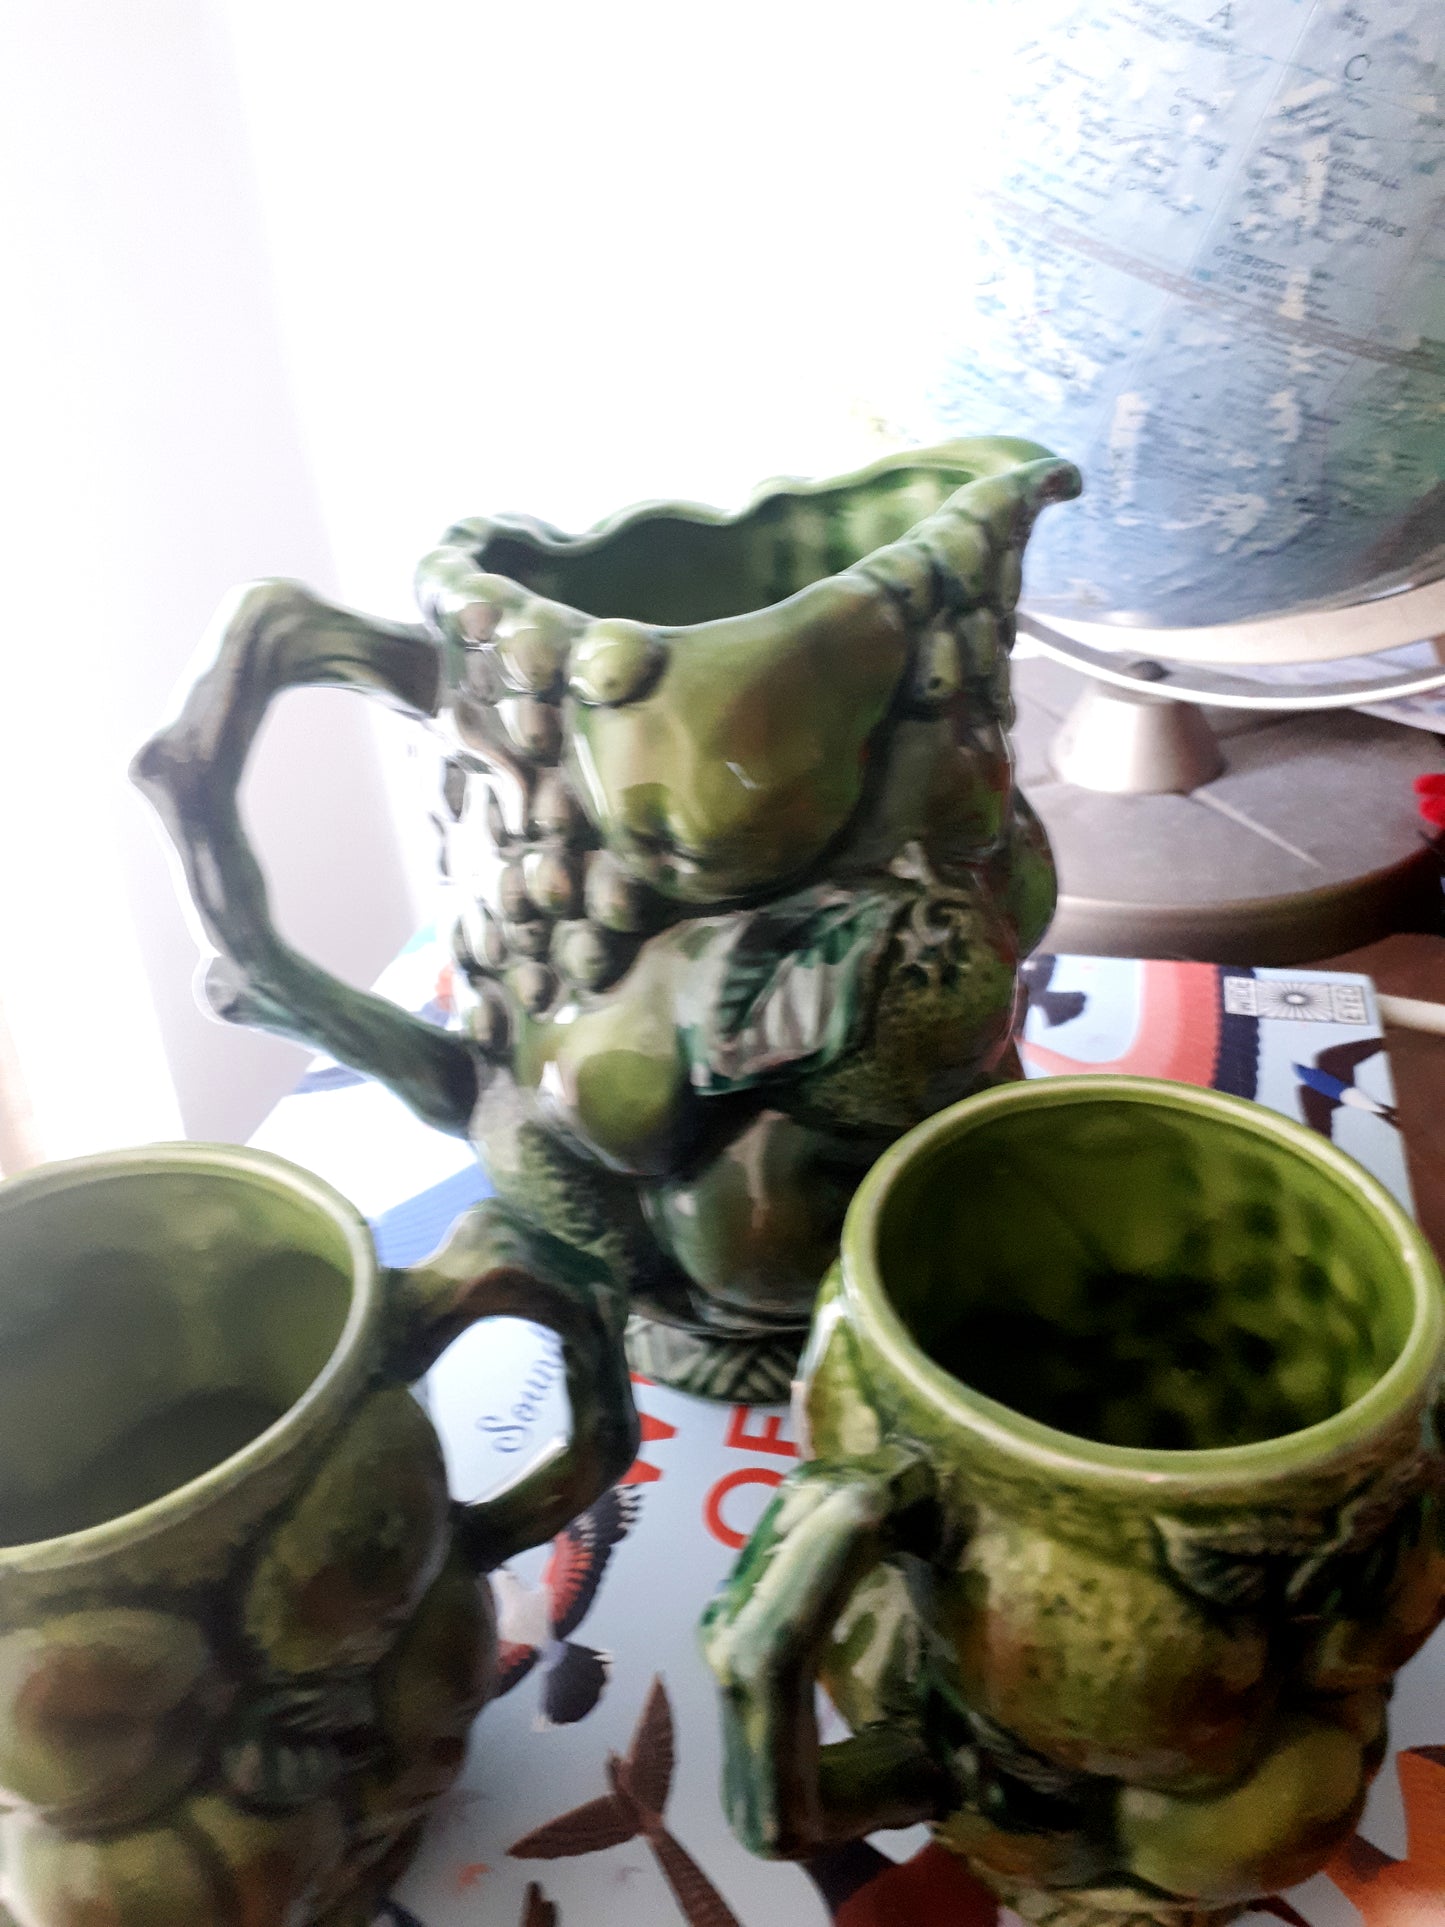 Vintage 1960's Inarco Green Spice Fruit Pitcher with 2 Cups (set of 3 items) - Made in Japan